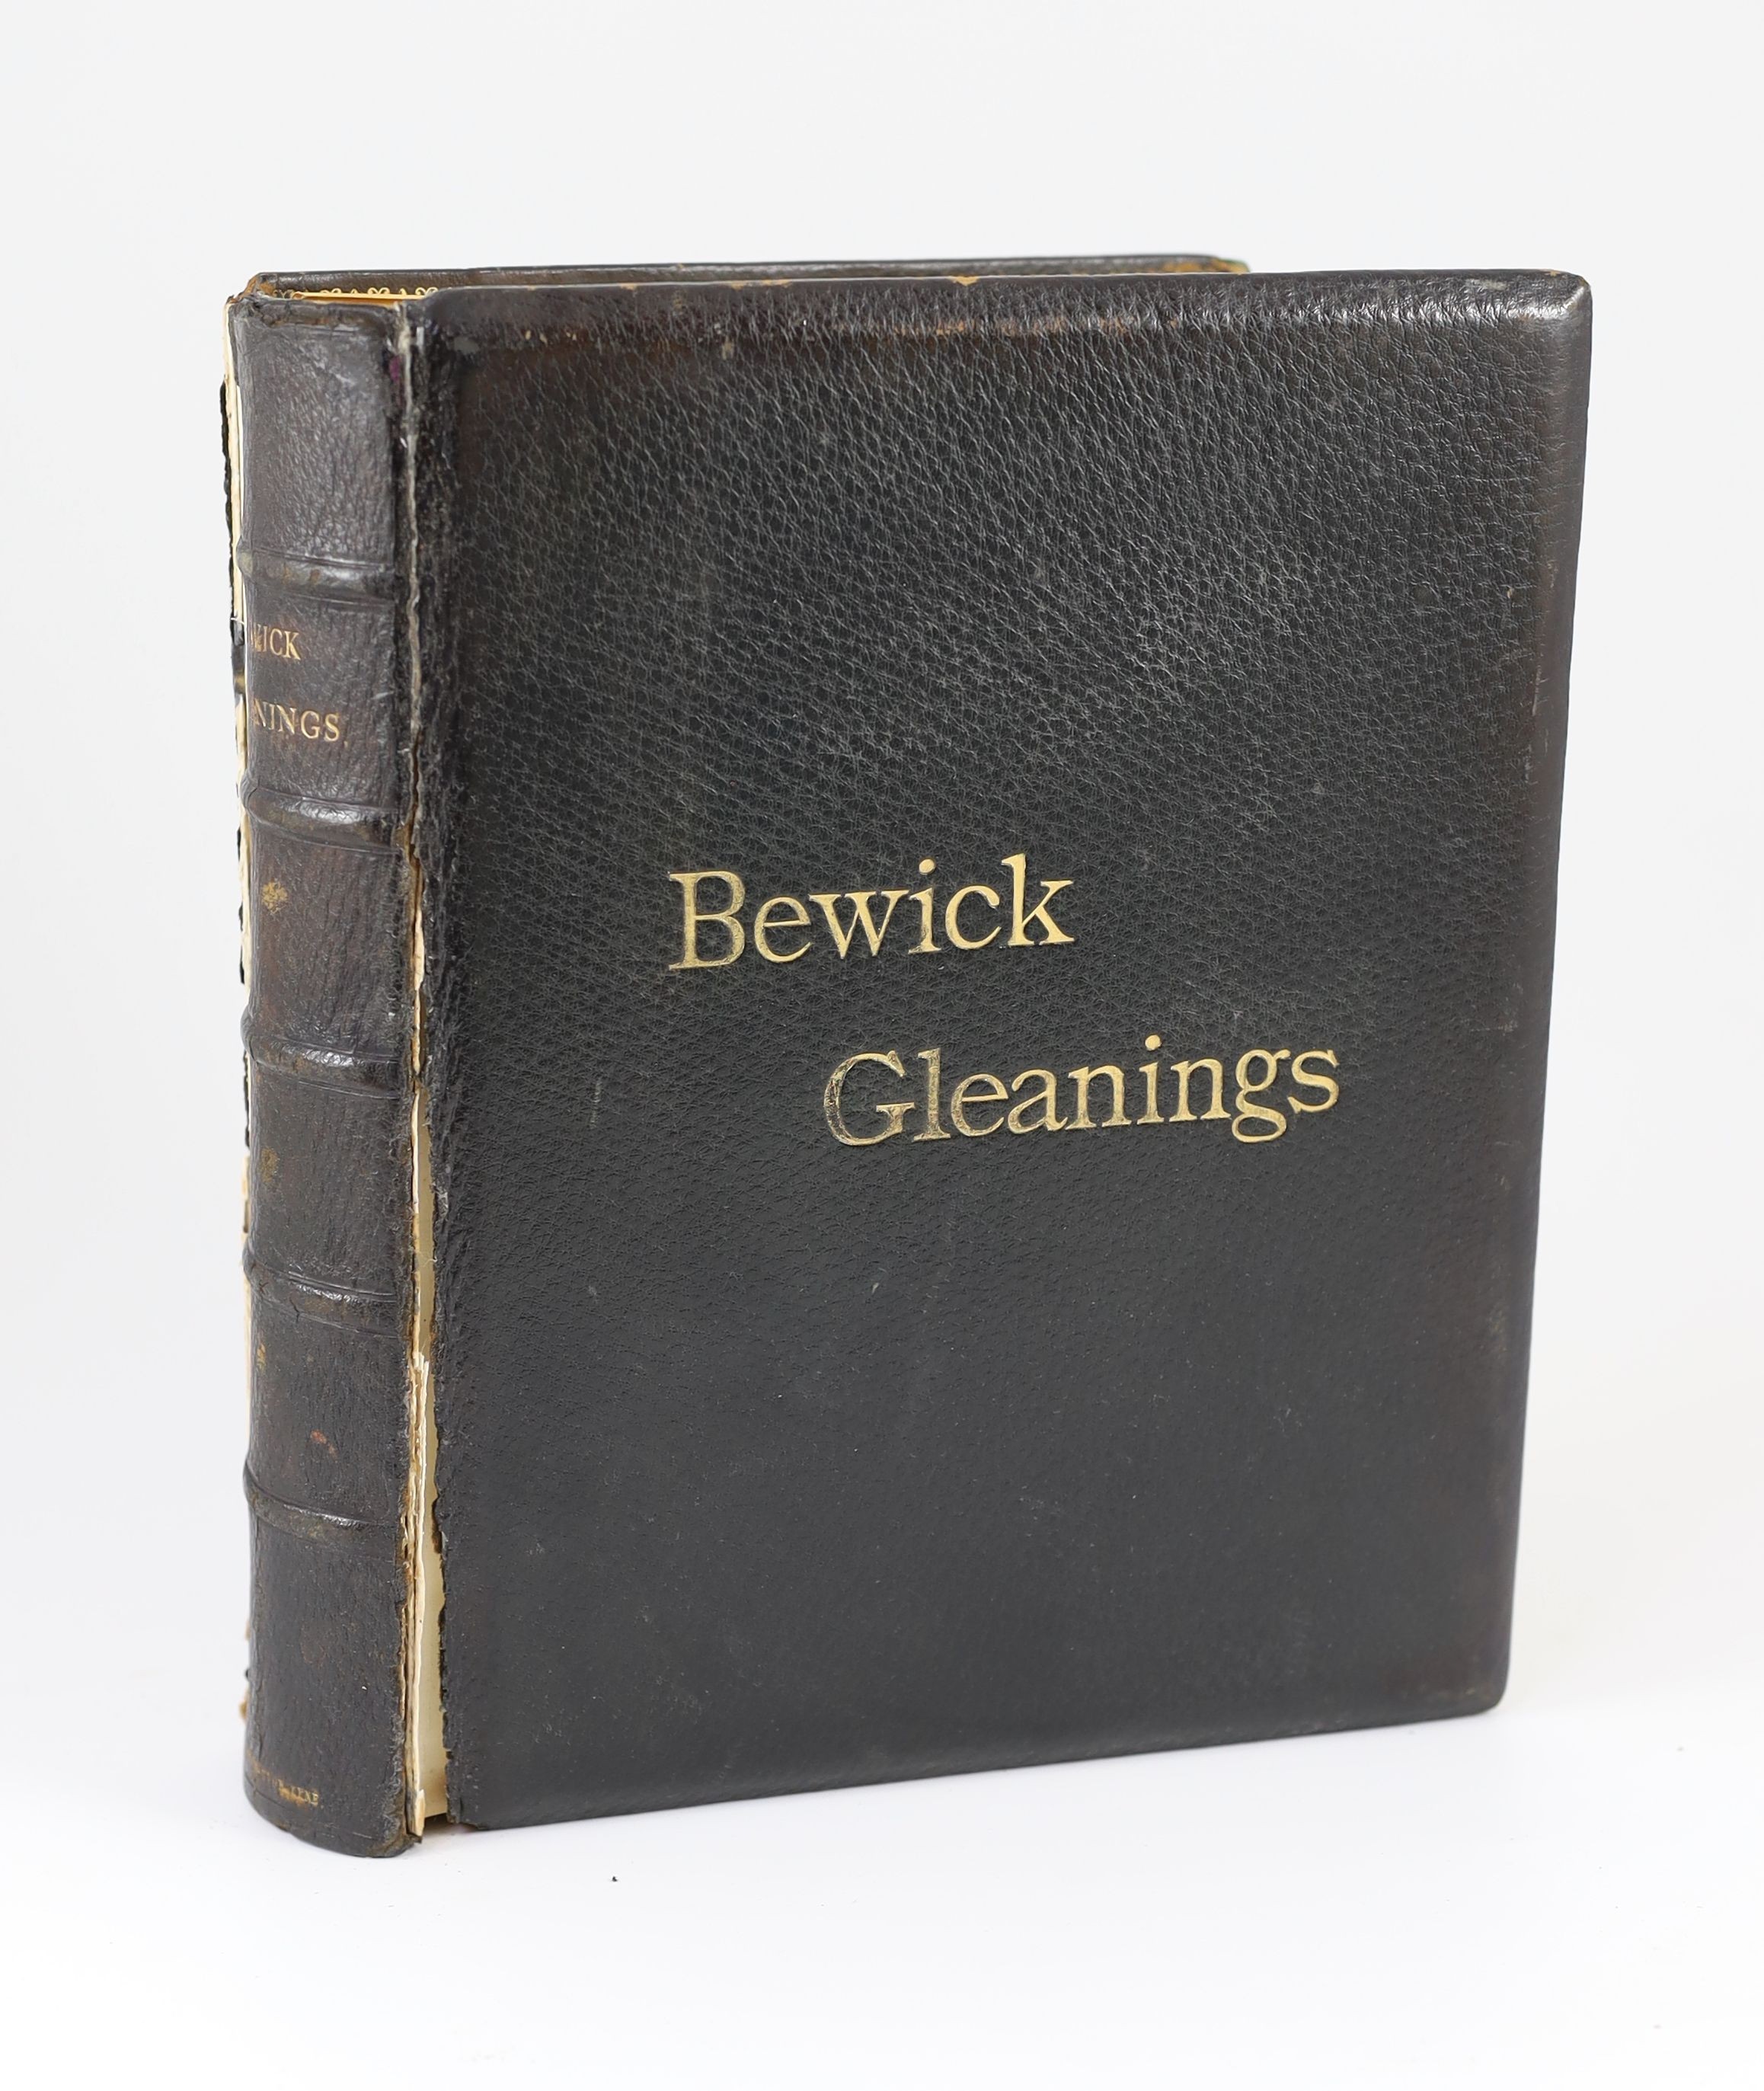 Bewick, Thomas - Bewick Gleanings, 2 parts in 1 vol. 4to, large paper copy, one of 200 signed by the editor, Julia Boyd, contemporary black morocco gilt, front board almost detached, rear board detached, Andrew Reid, New